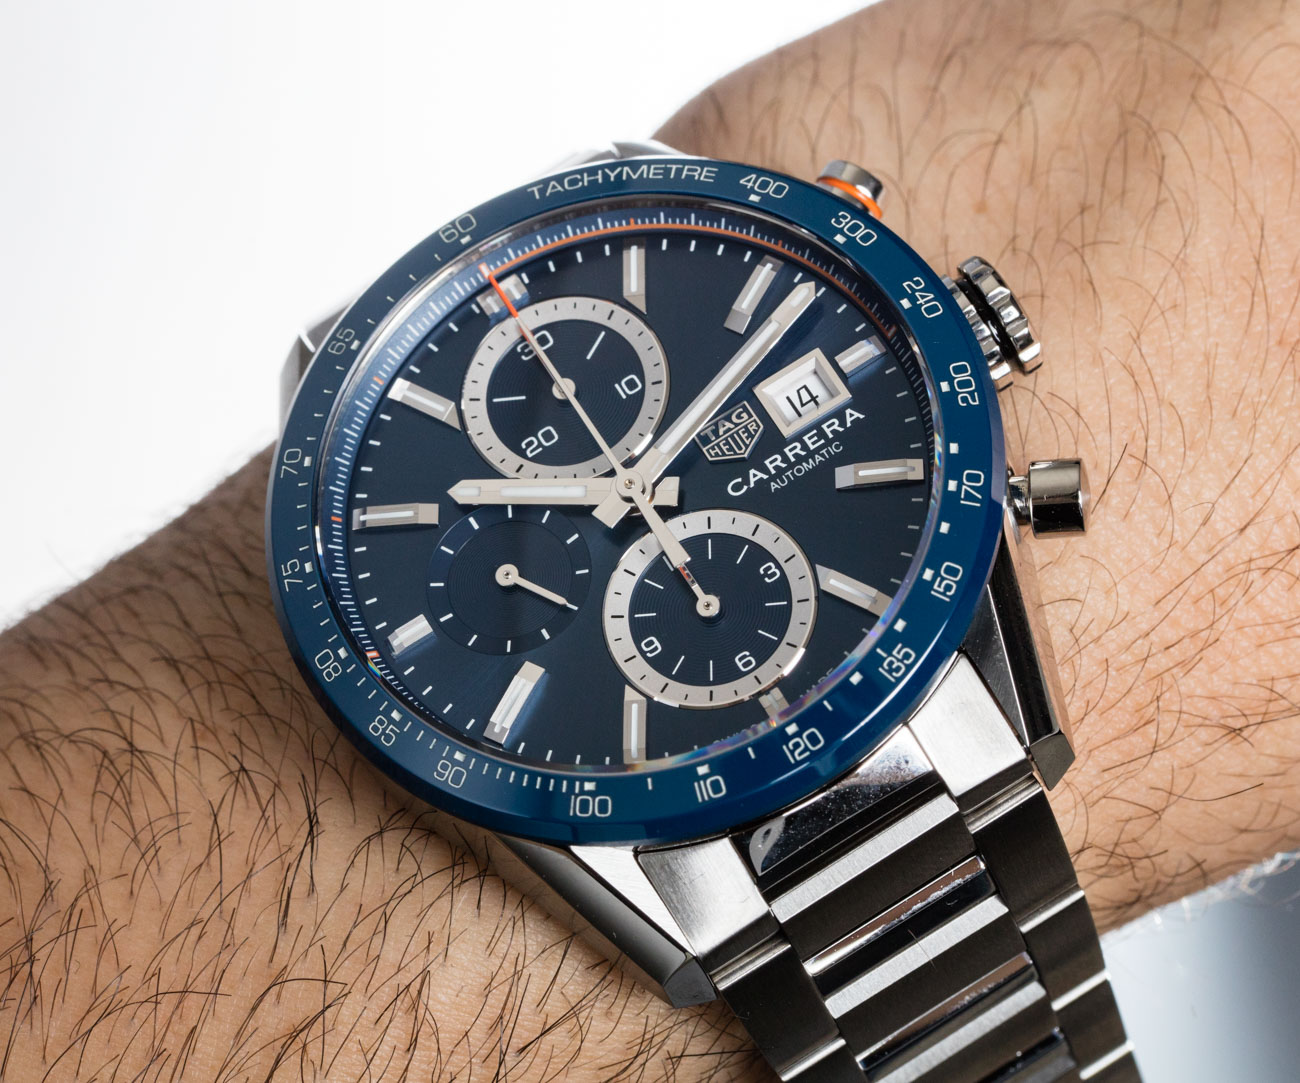  Tag Heuer Carrera Calibre 16 Chronograph 41mm Watch : Clothing,  Shoes & Jewelry